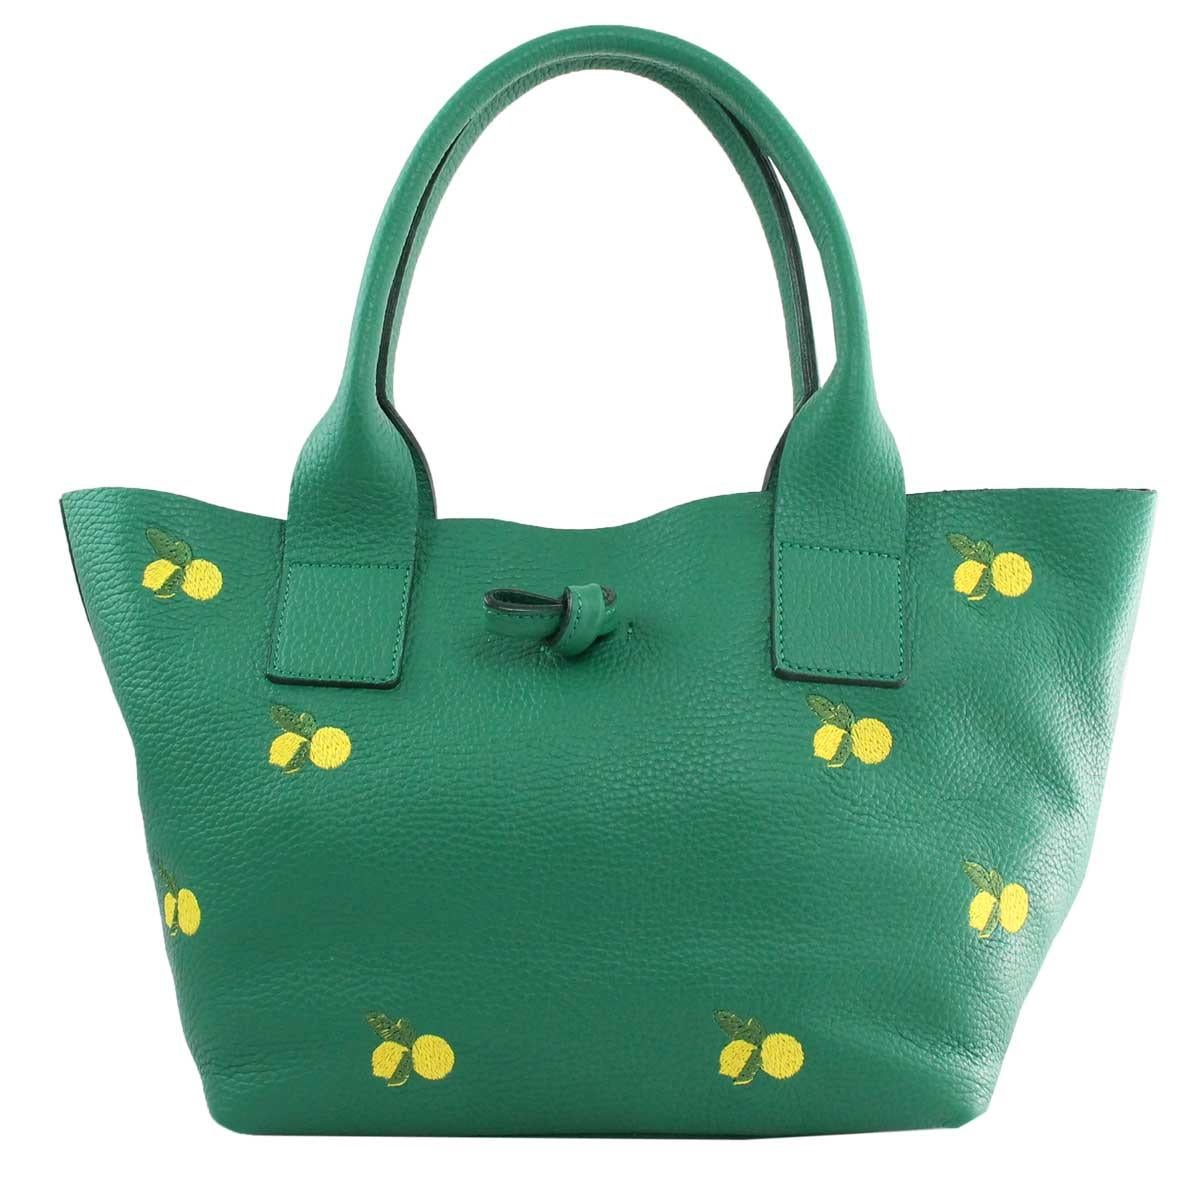 Le Moki Green Leather Handle Shoulder Bag
totally made in italy embellished with lemons